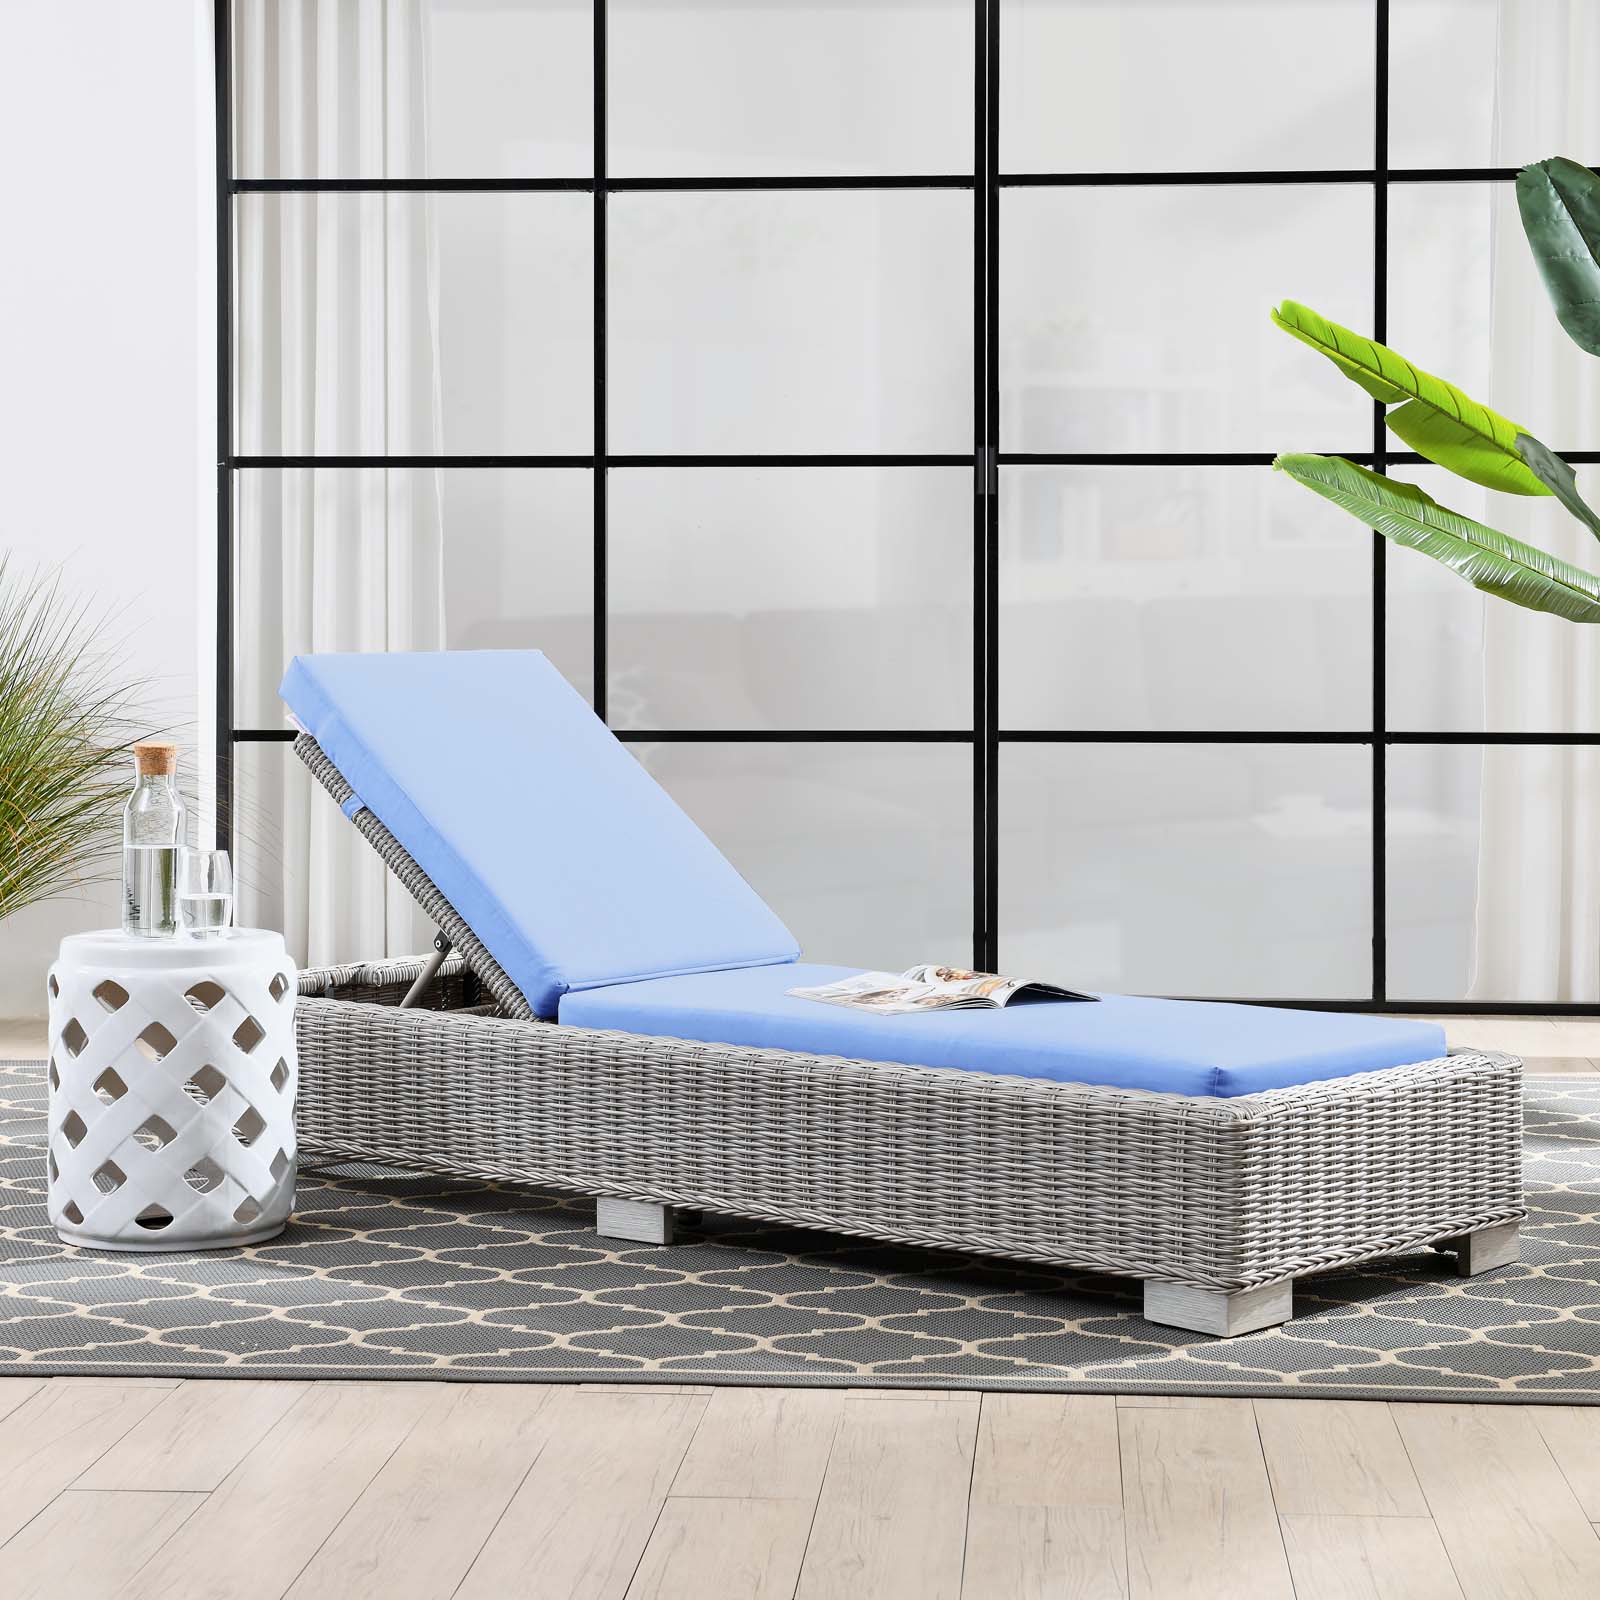 Lounge Chair Chaise, Rattan, Wicker, Light Grey Gray Light Blue, Modern Contemporary Urban Design, Outdoor Patio Balcony Cafe Bistro Garden Furniture Hotel Hospitality - image 2 of 9